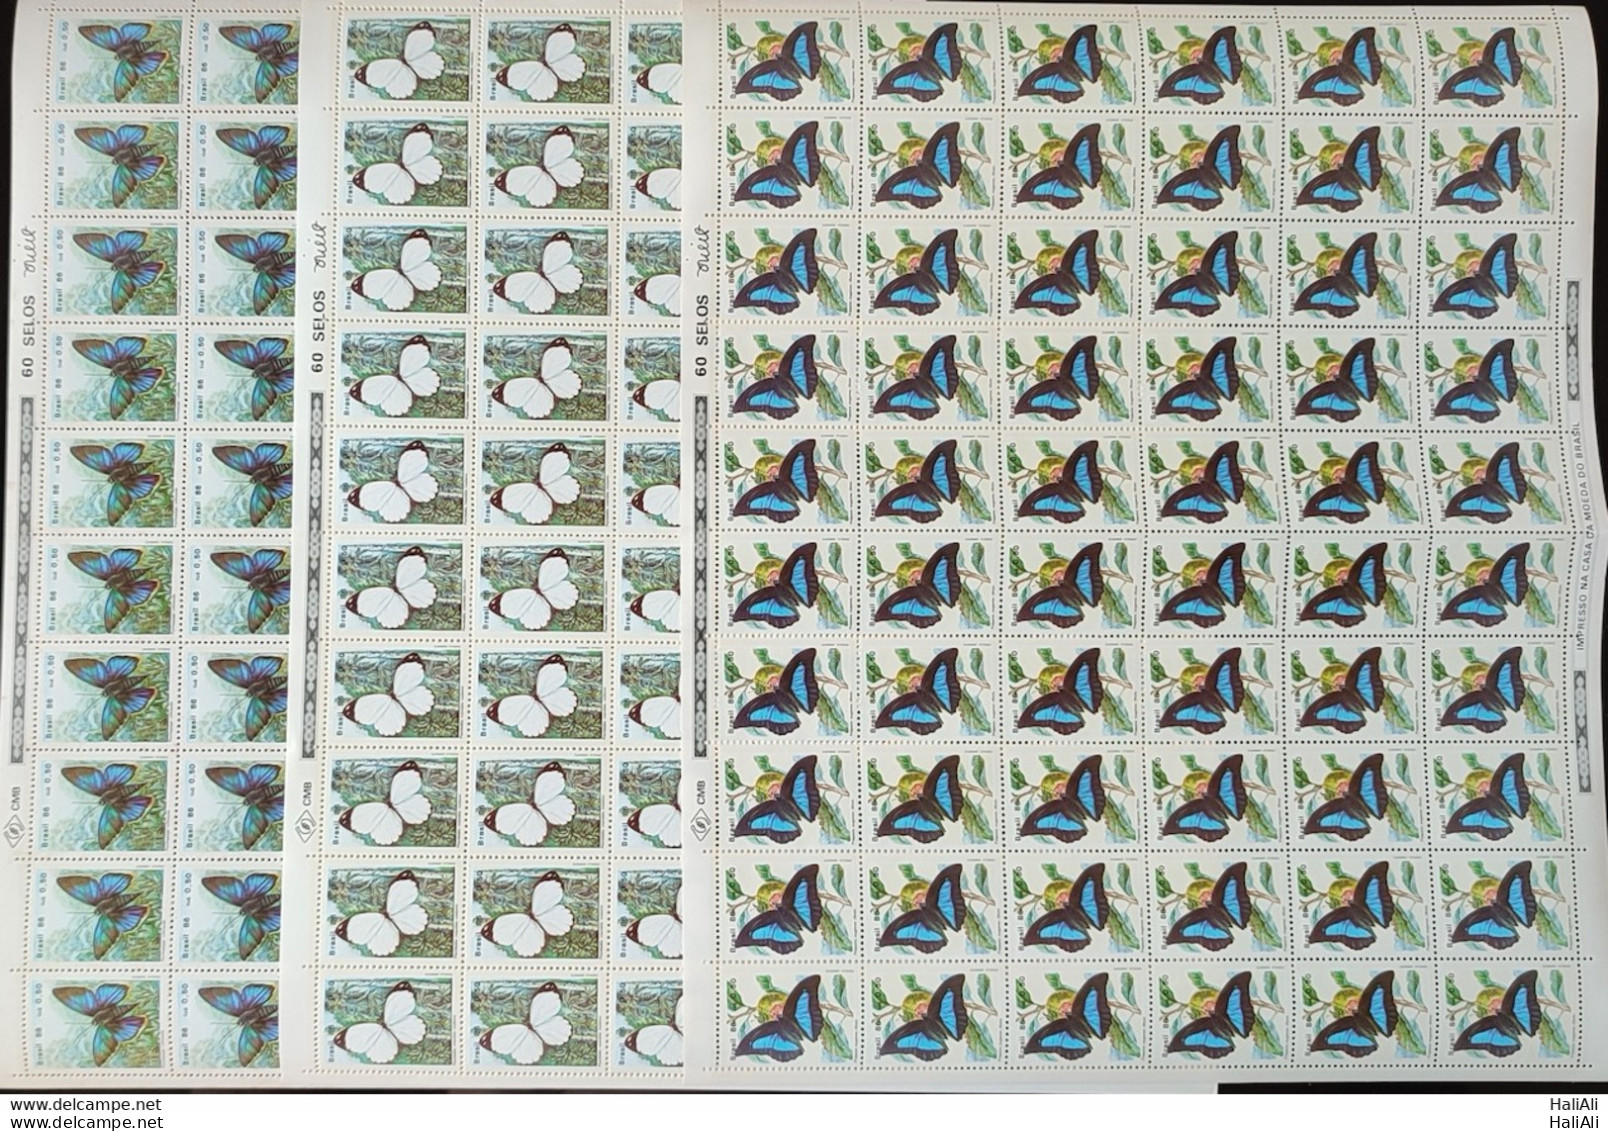 C 1512 Brazil Stamp Butterfly Insects 1986 Sheet Complete Series.jpg - Ungebraucht